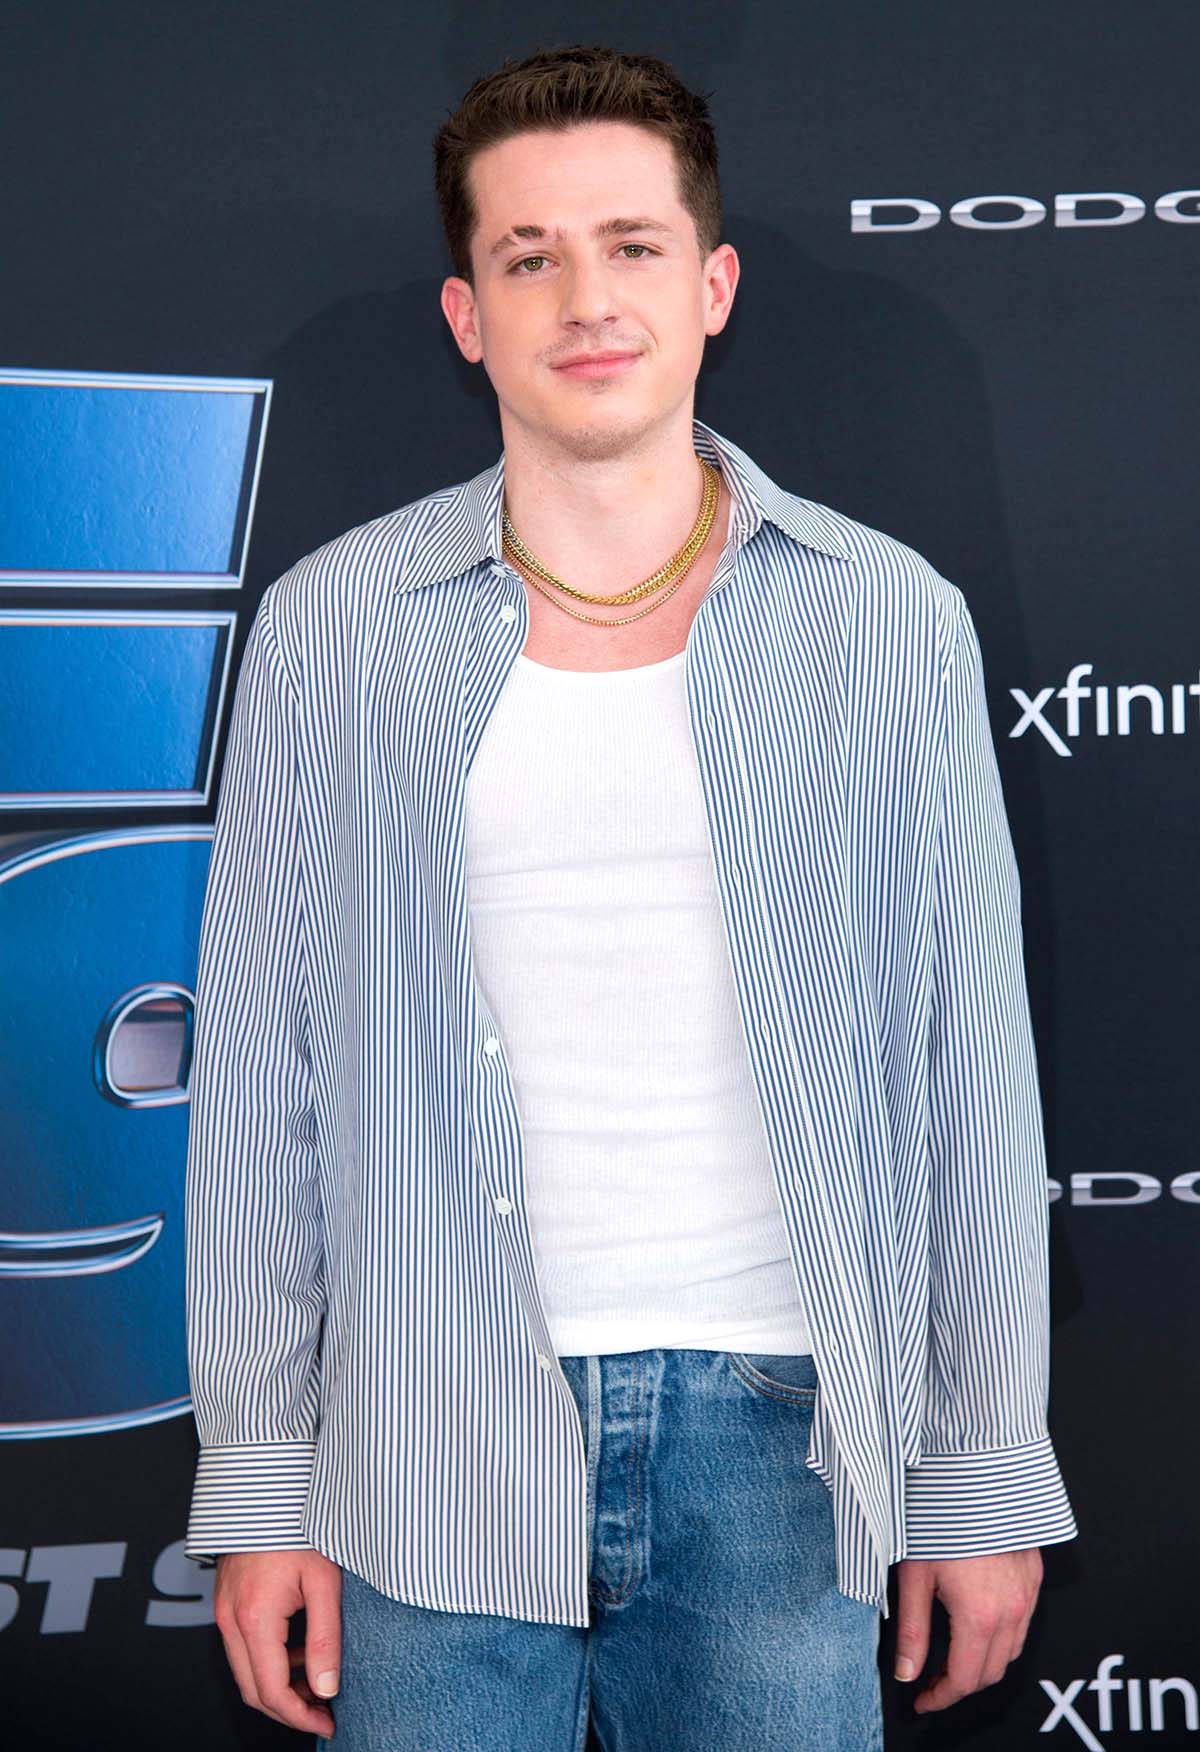 Who Is Brooke Sansone? - All About Charlie Puth's Fiancée